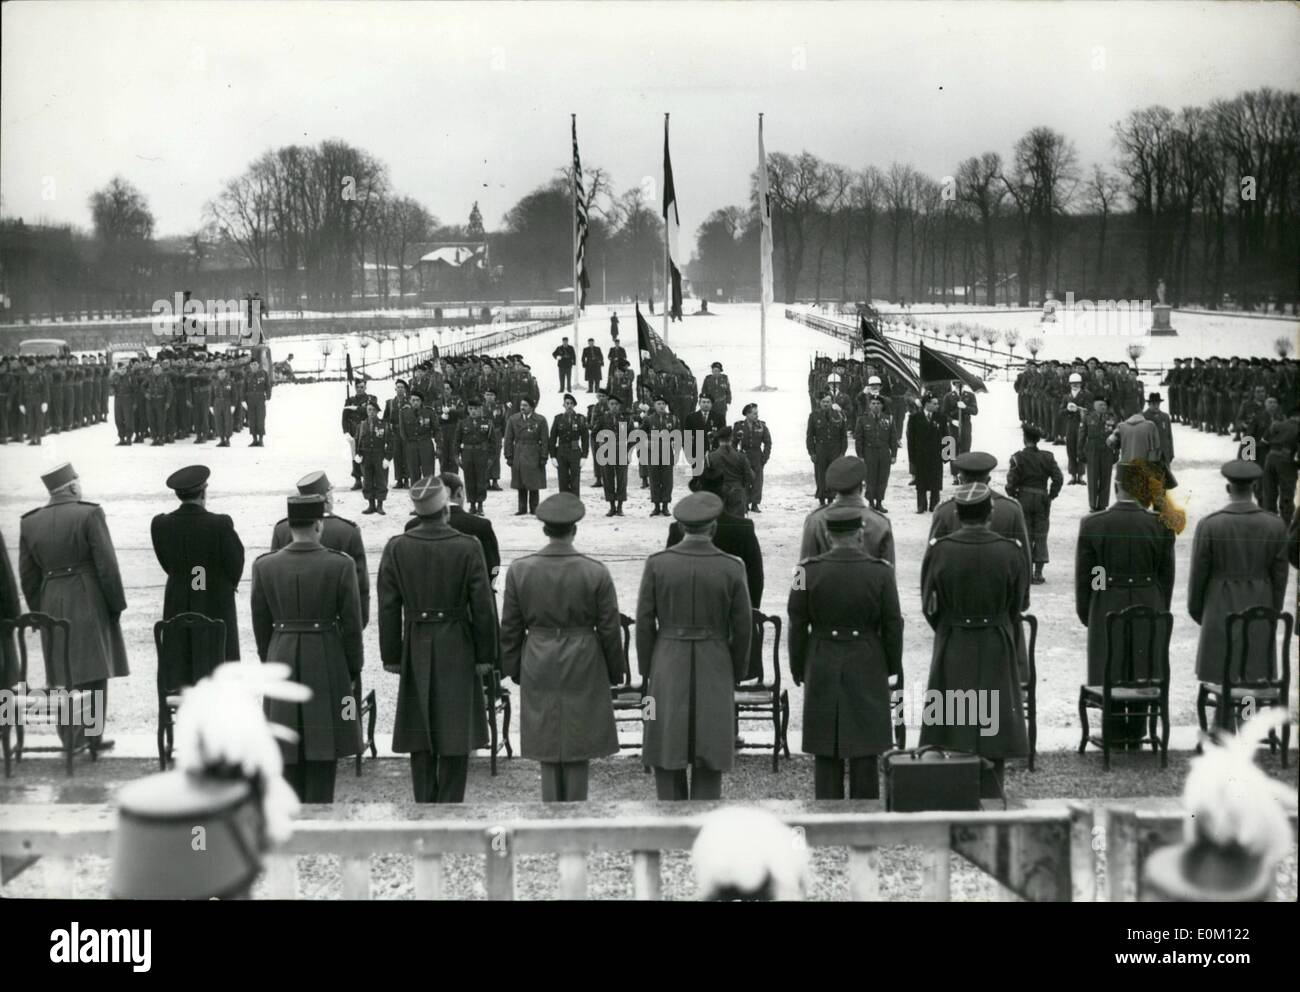 Jan. 01, 1953 - French Uno Battalion honoured General view of the ceremony held at Saint-Germain-en-Laye, near Paris. General Matthew B. Ridgway was present at the parade when the unit of the battalion stationed at Saint-Germain-en-Laye was awarded various decorations. Stock Photo